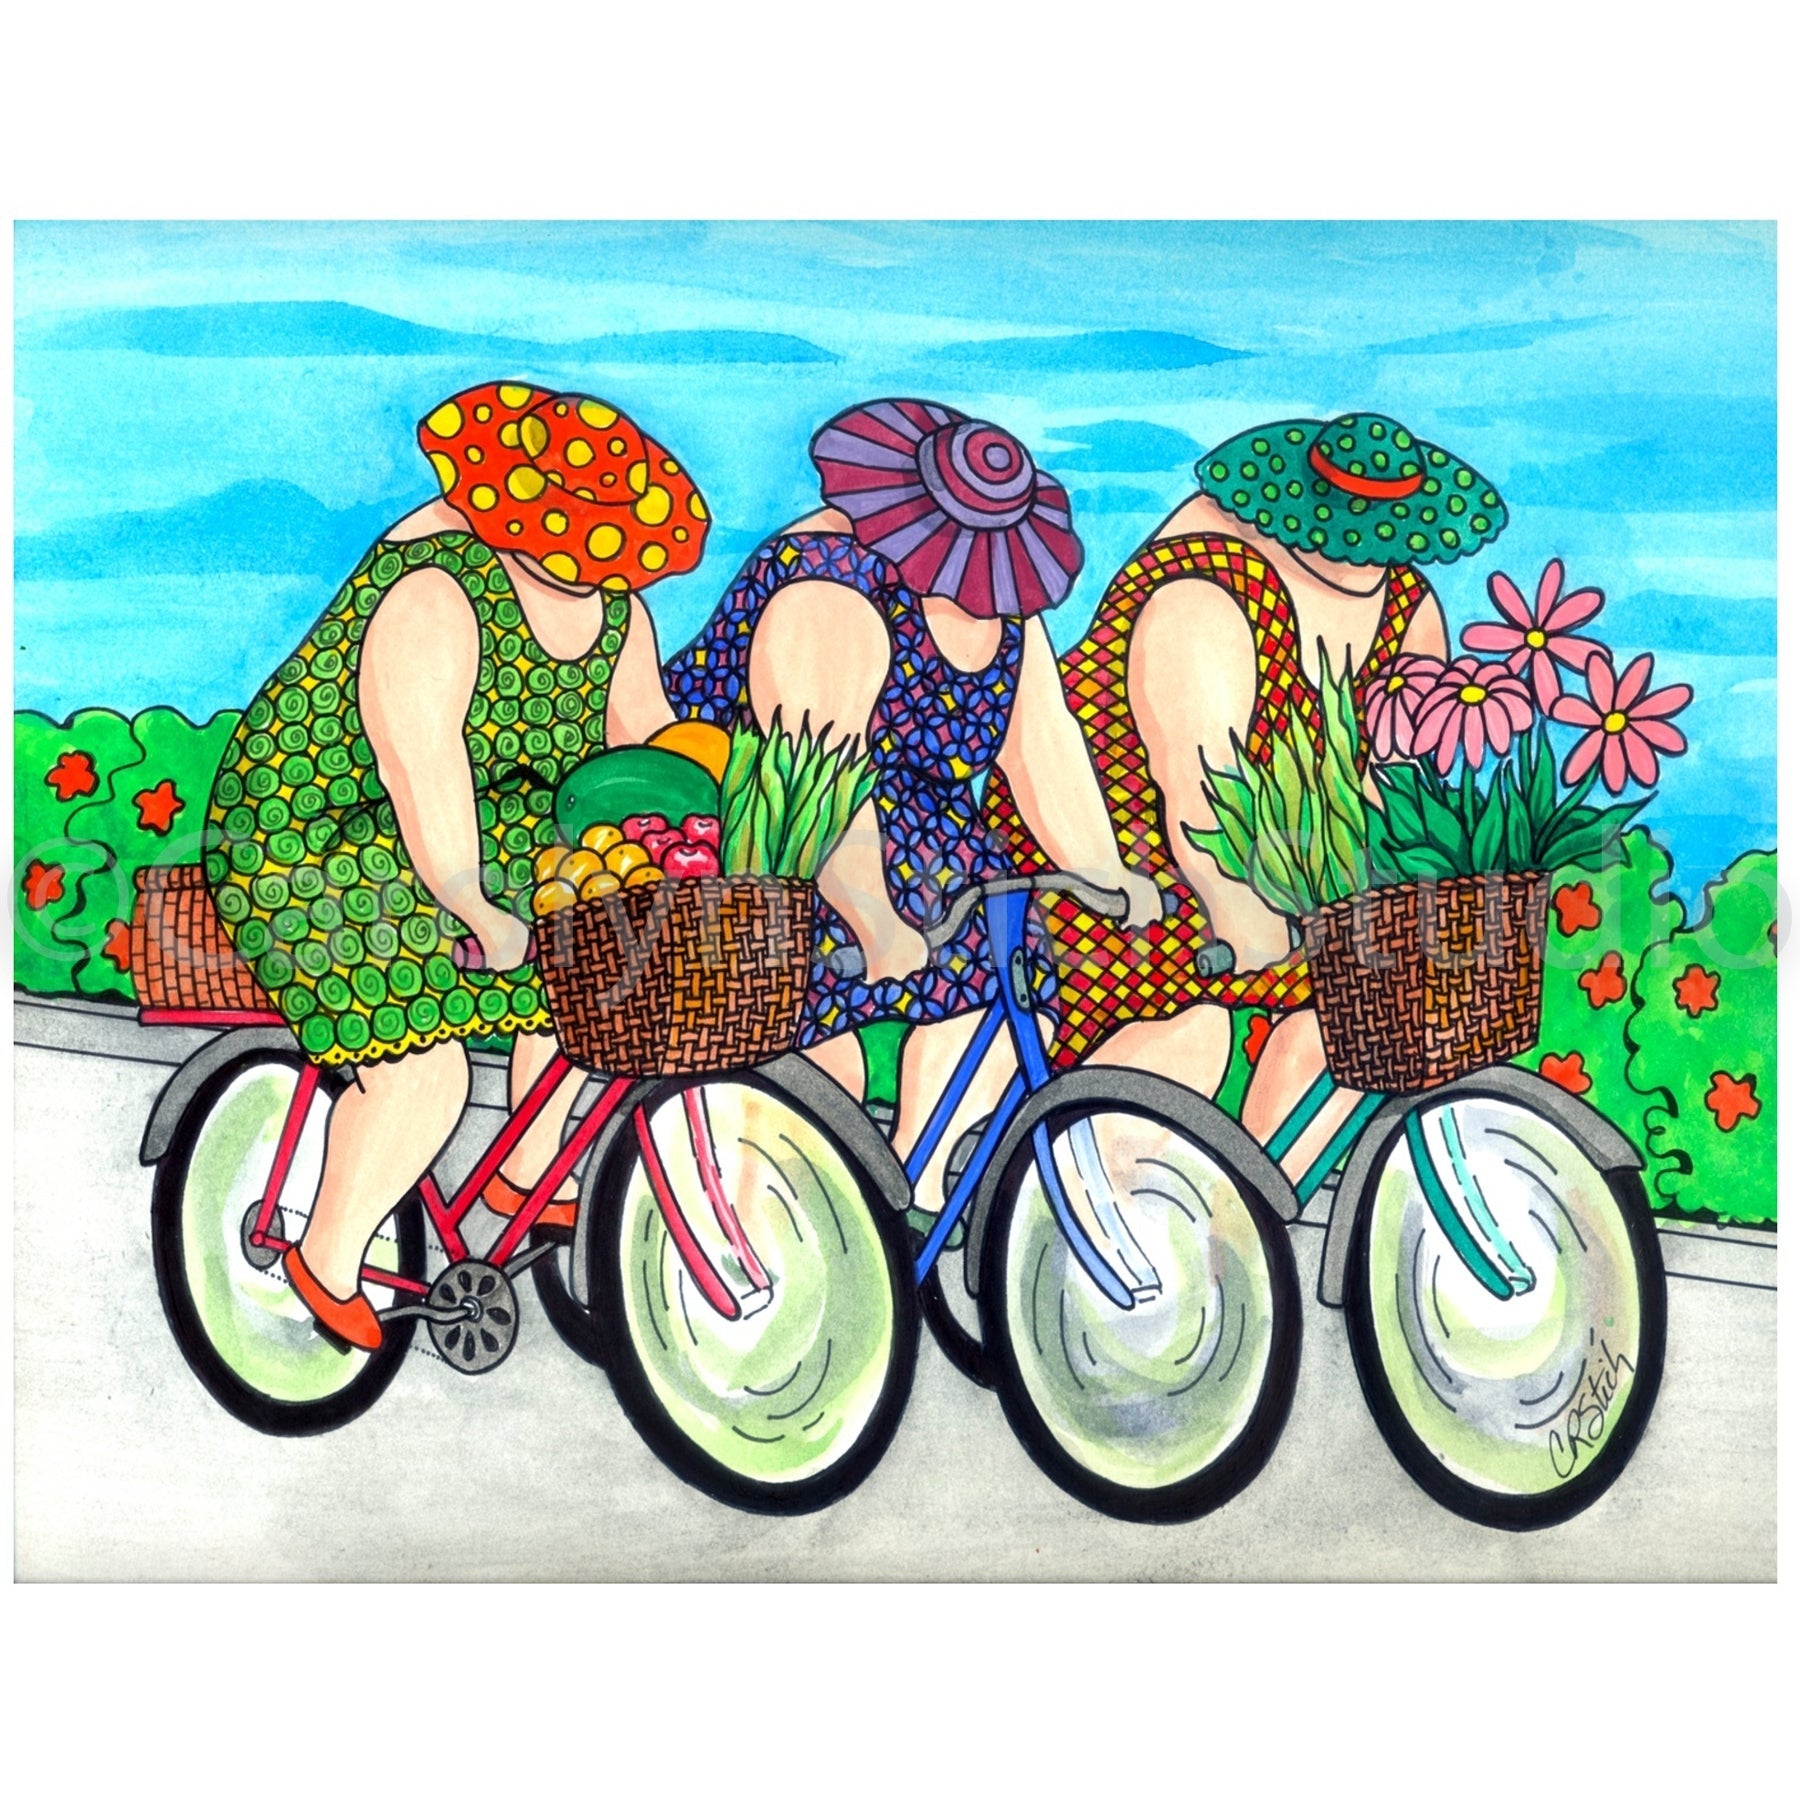 The Girls On the Road, rug hooking pattern